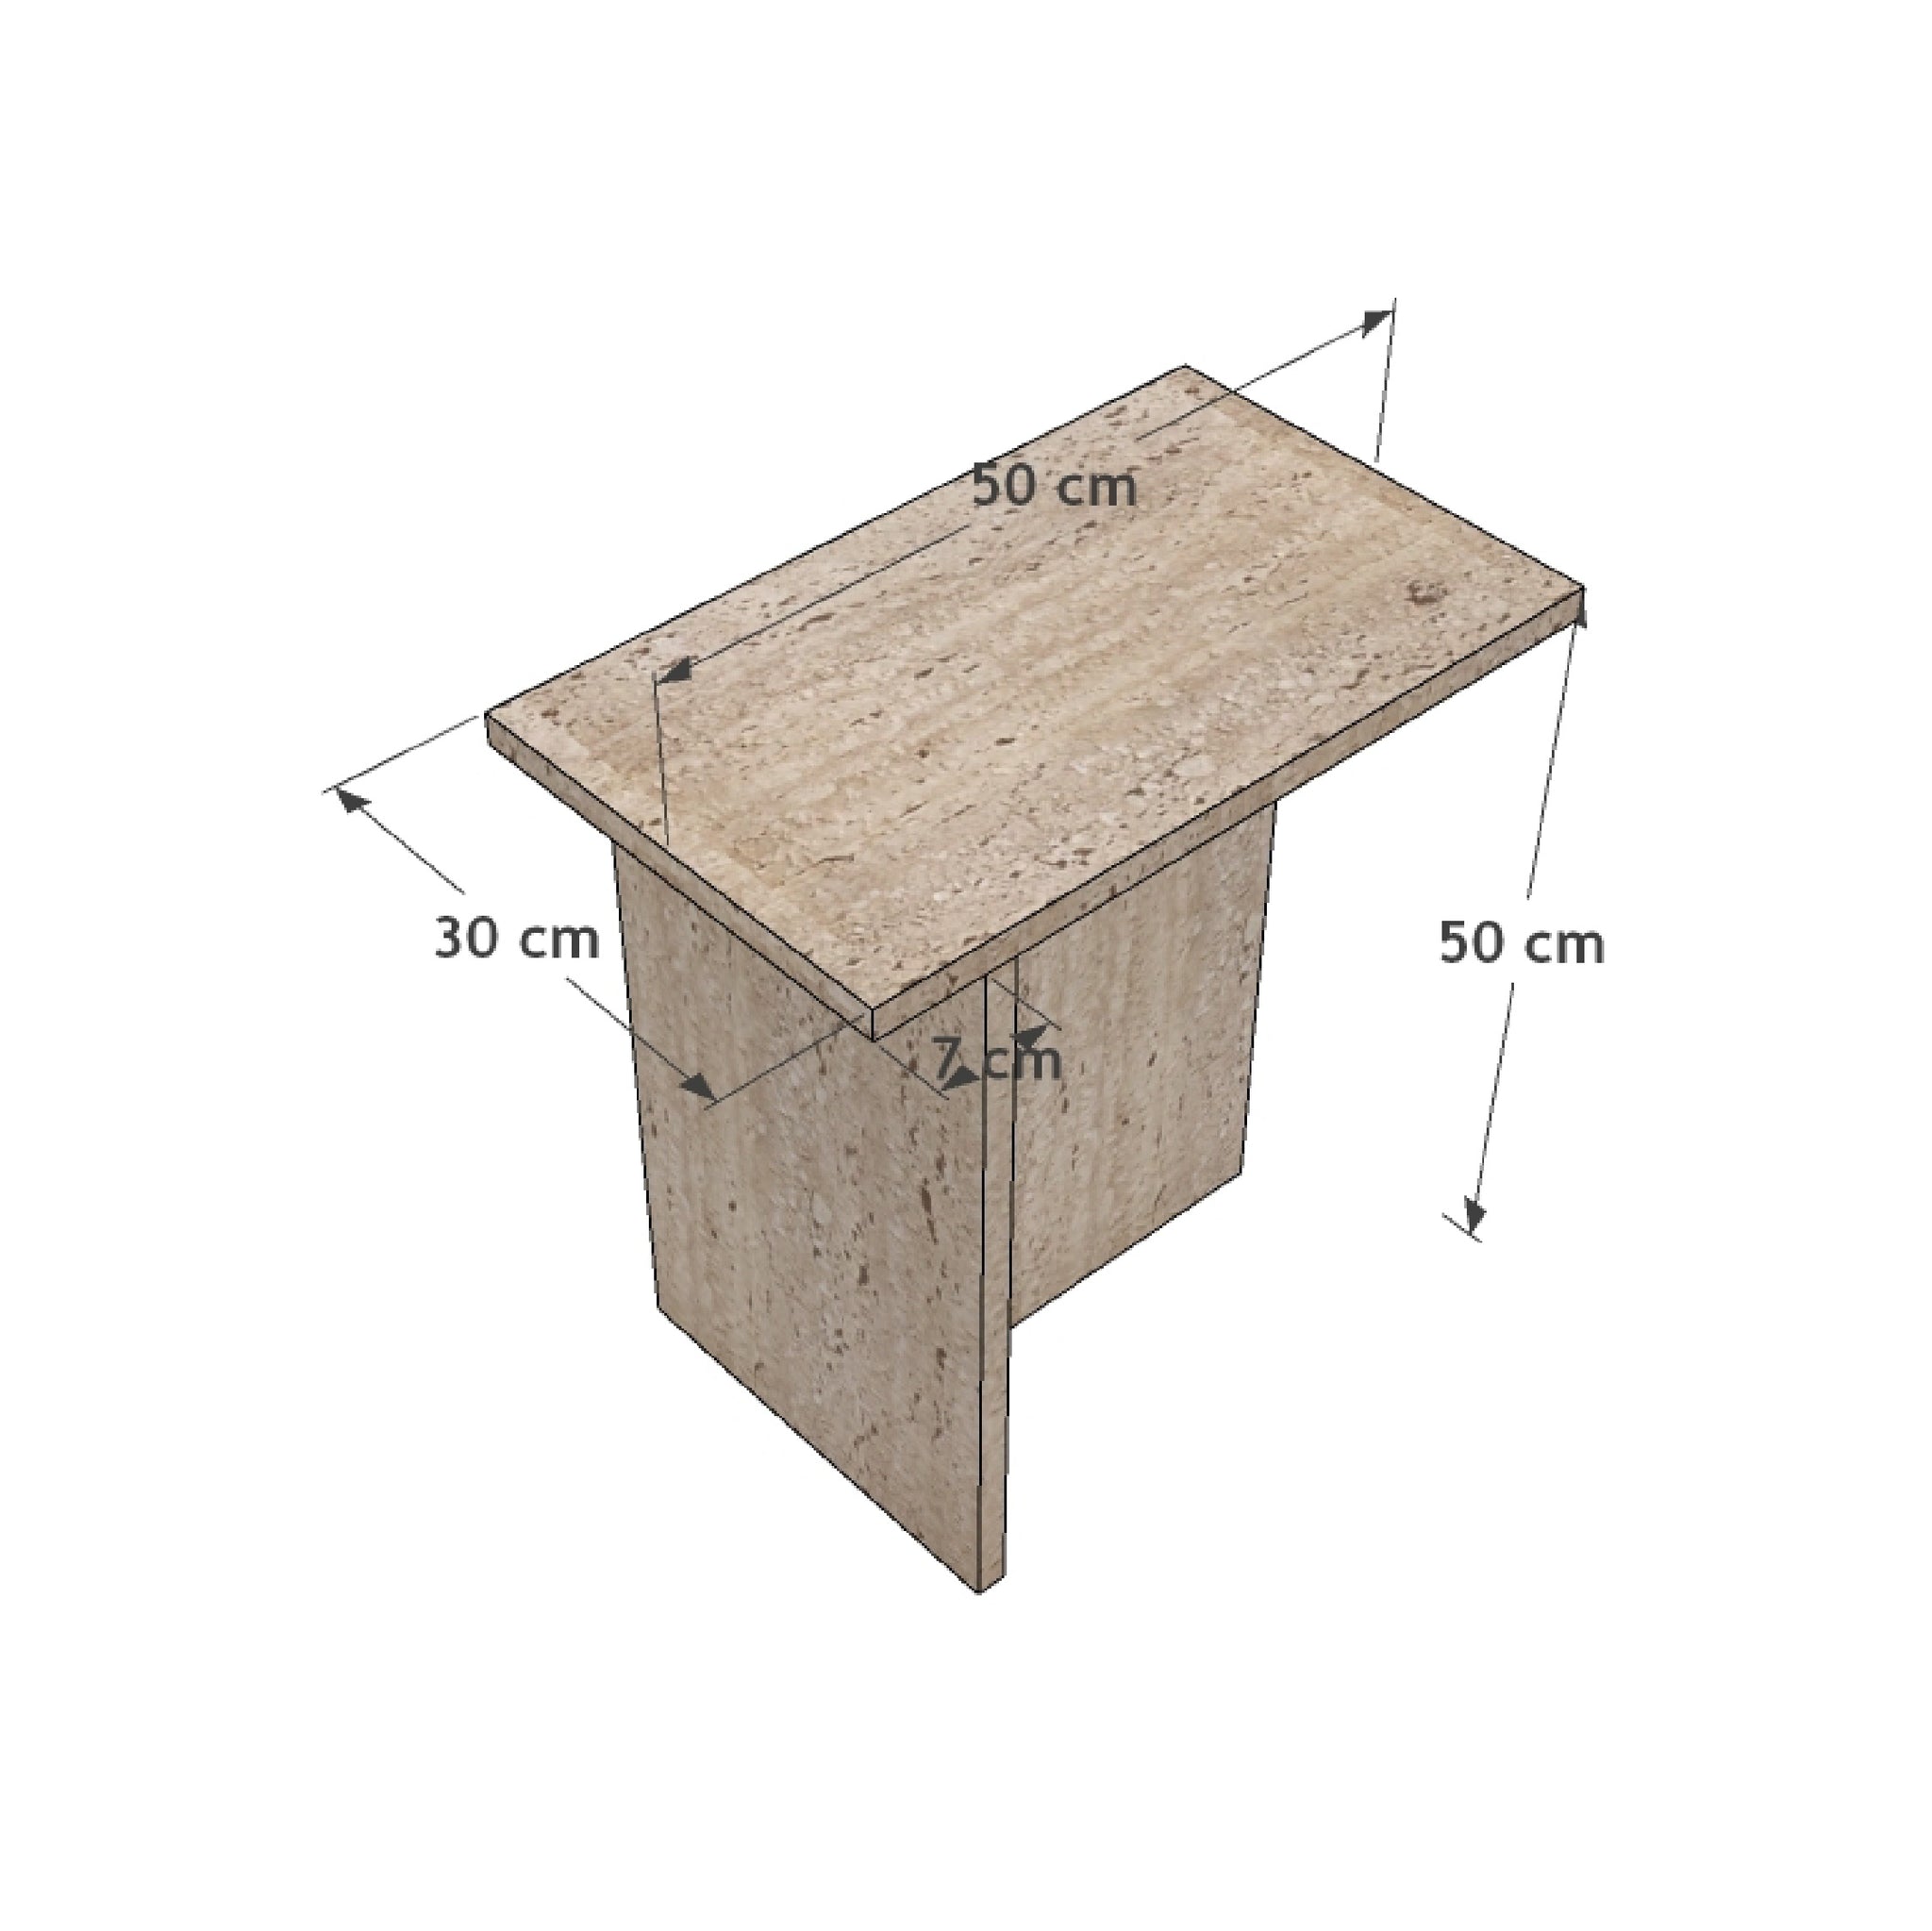 Archer Side Table Dimensions from Top